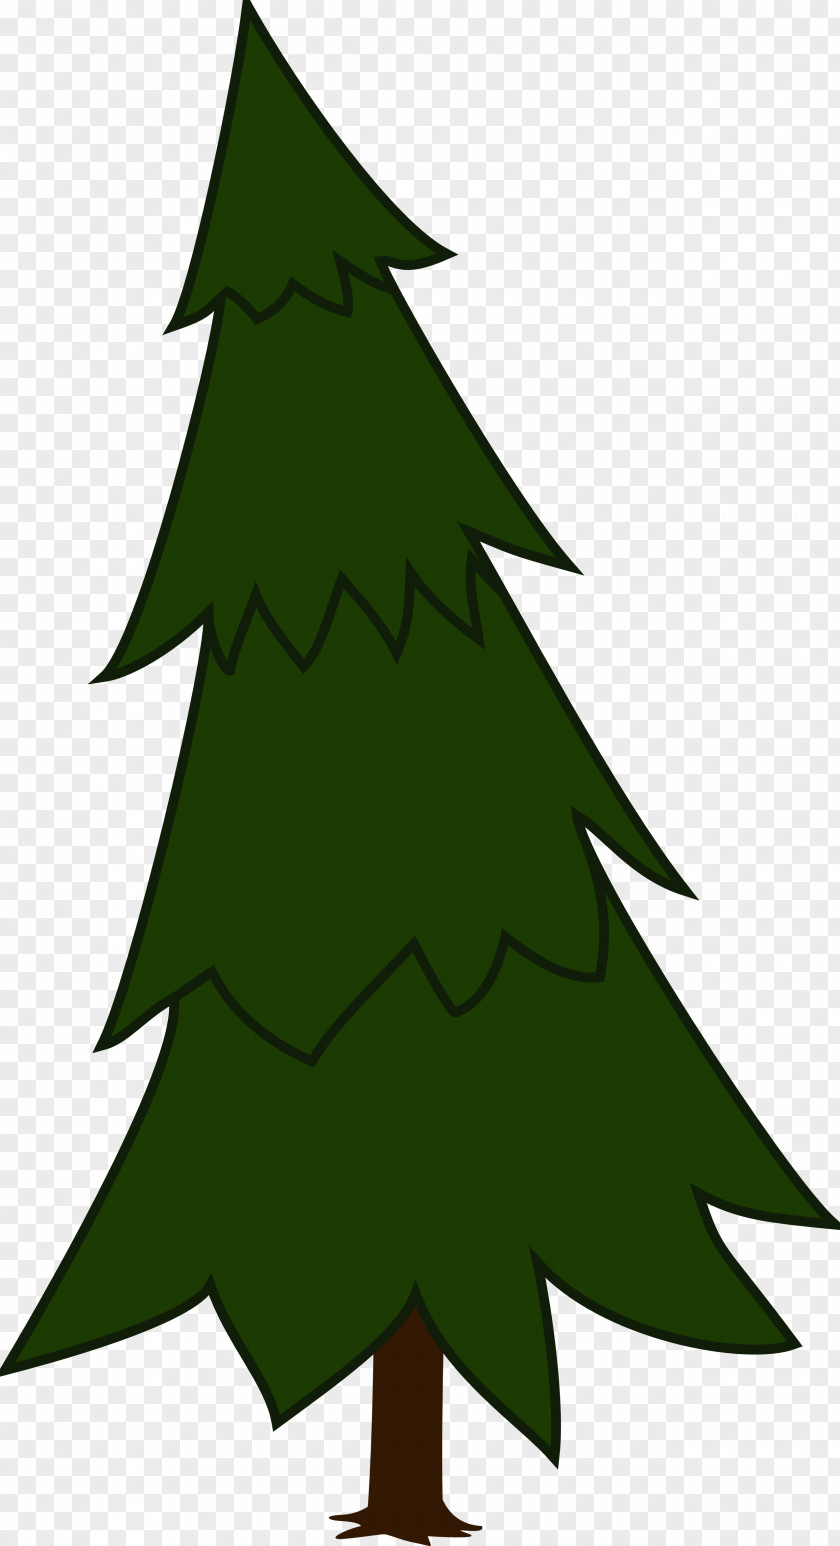 Cartoon Forest Pine Tree Spruce Clip Art PNG